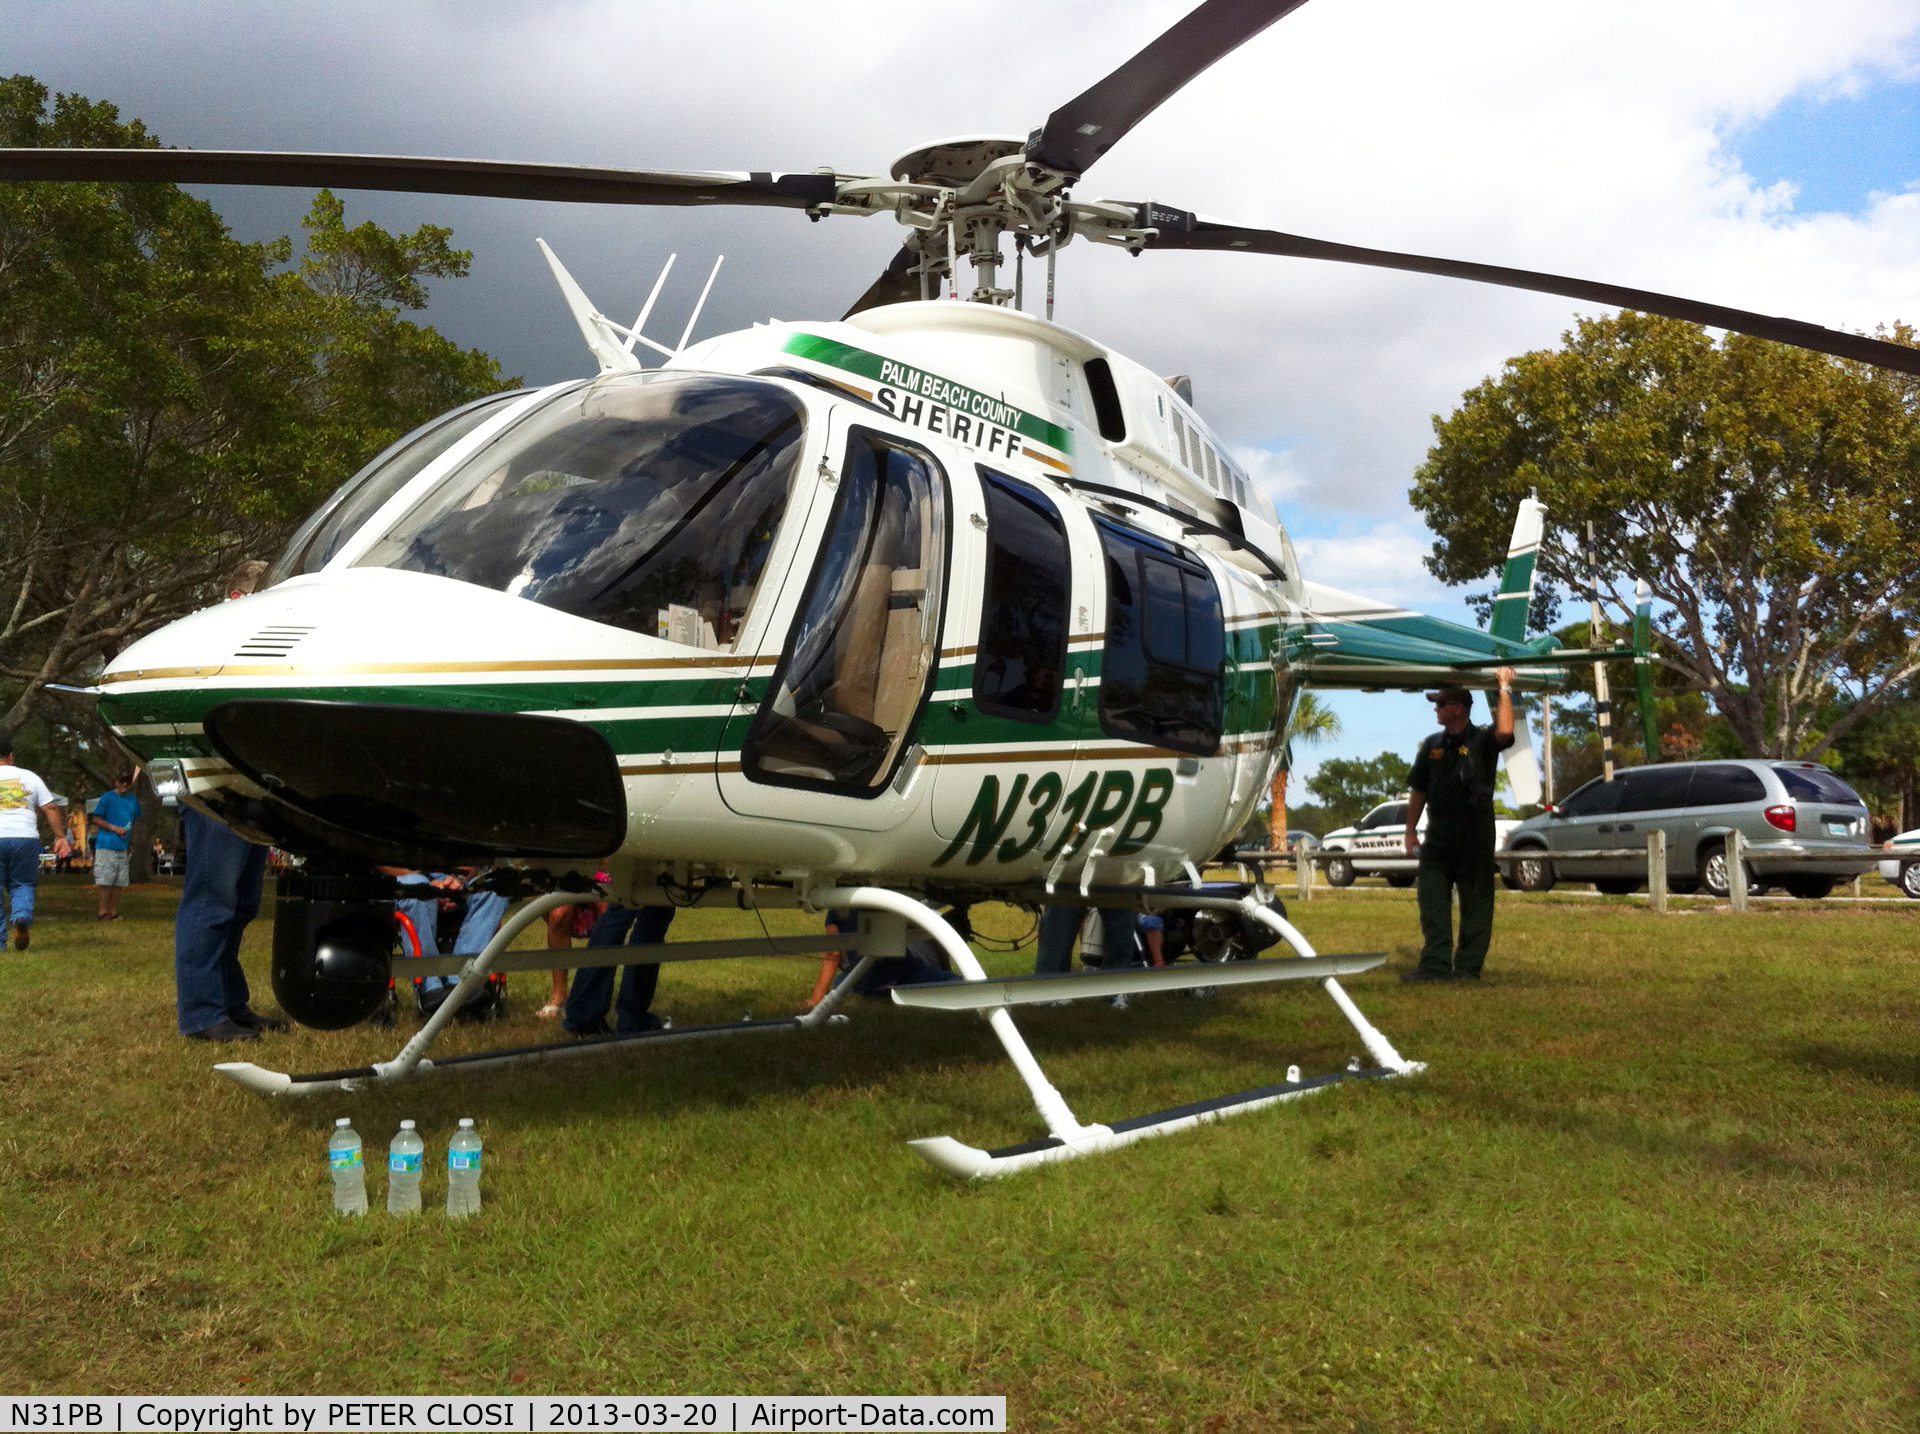 N31PB, 2003 Bell 407 C/N 53569, Eagle One, on display at Okeeheelee Park in West Palm Beach, FL for a PBSO event.